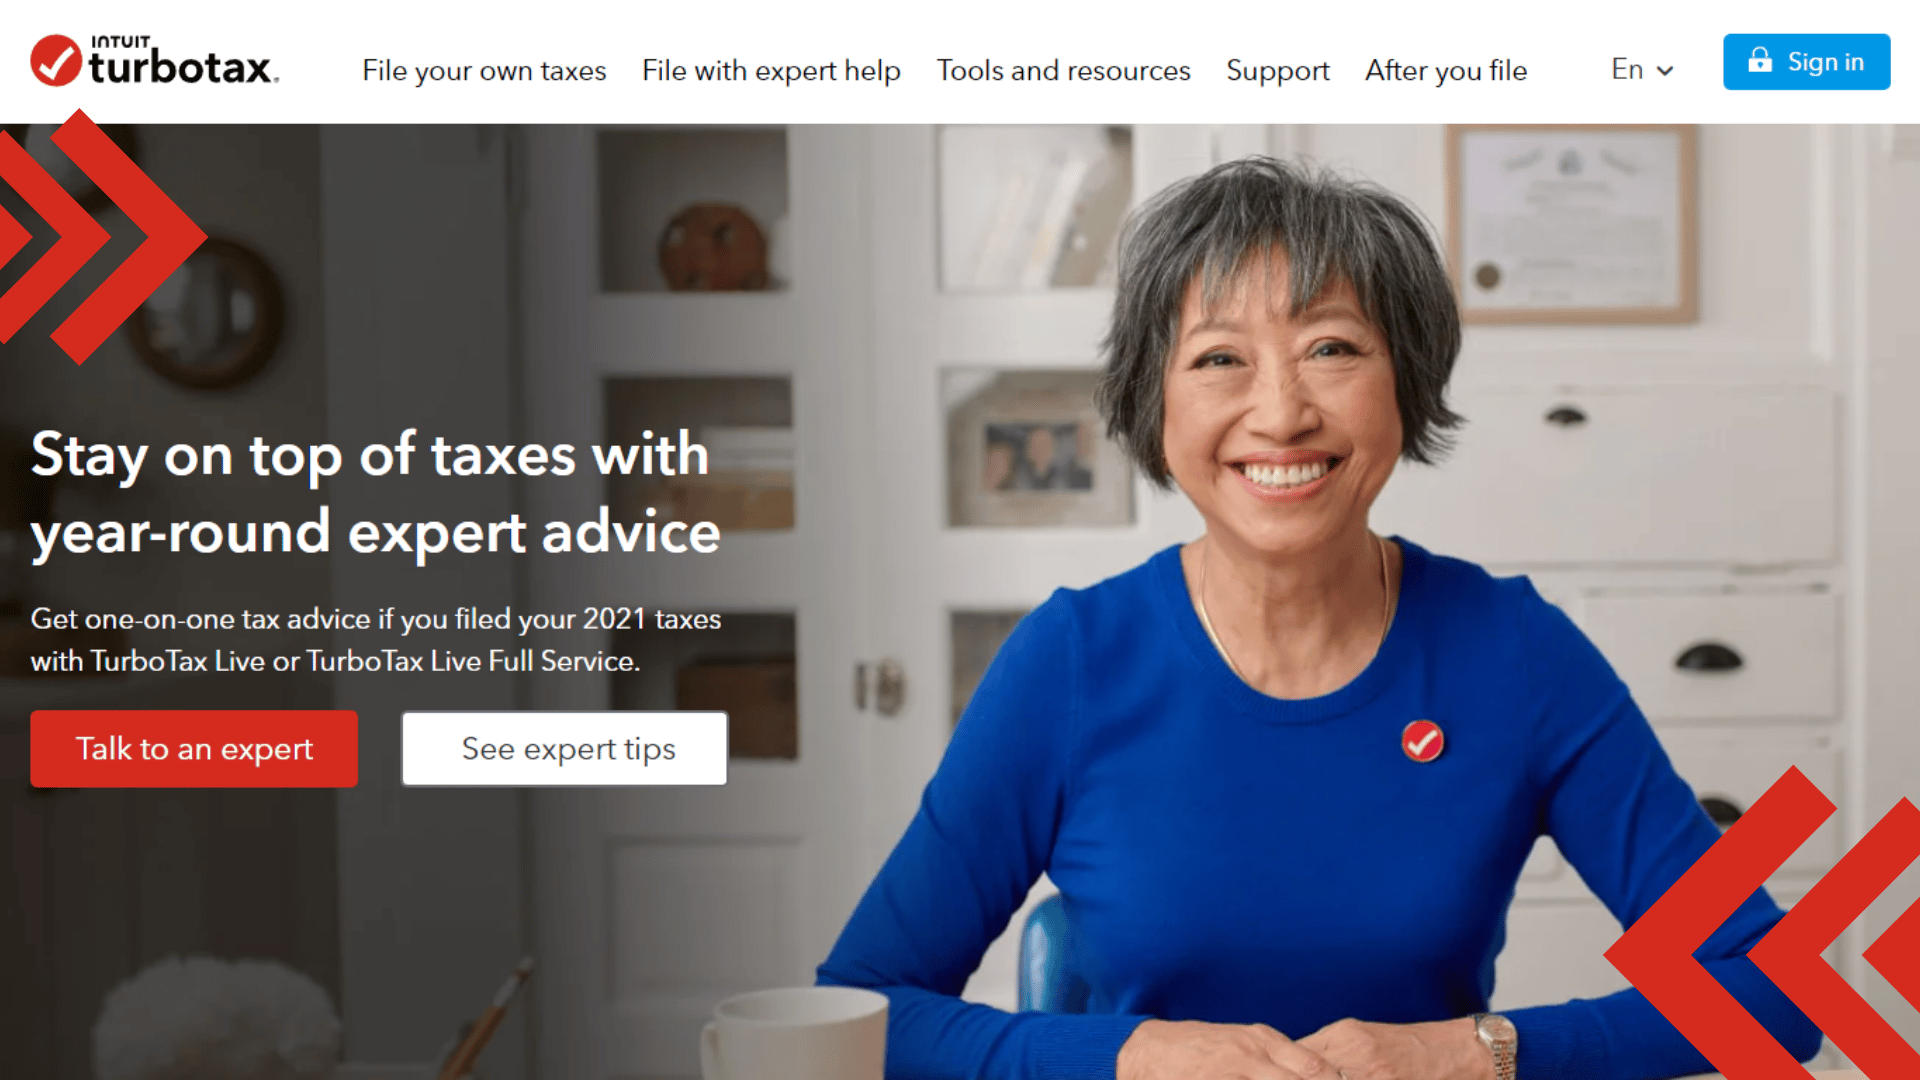 Turbotax Features